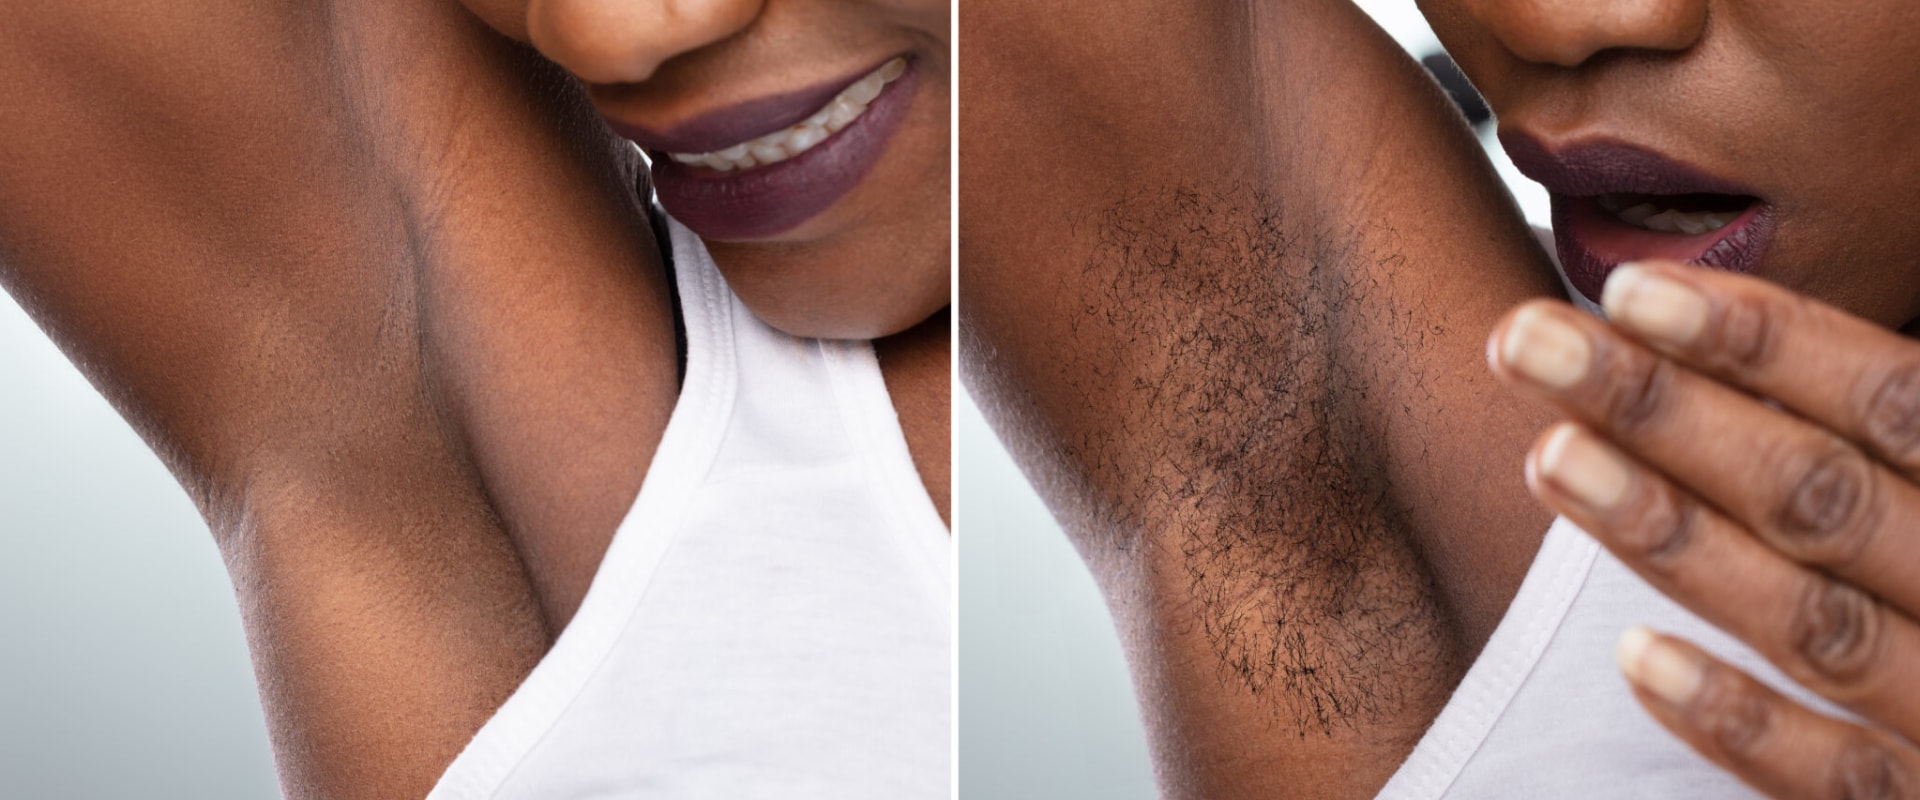 The Benefits of Laser Hair Removal for Dark Skinned Patients: Reduced Risk of Ingrown Hairs and Razor Burn Post-Treatment